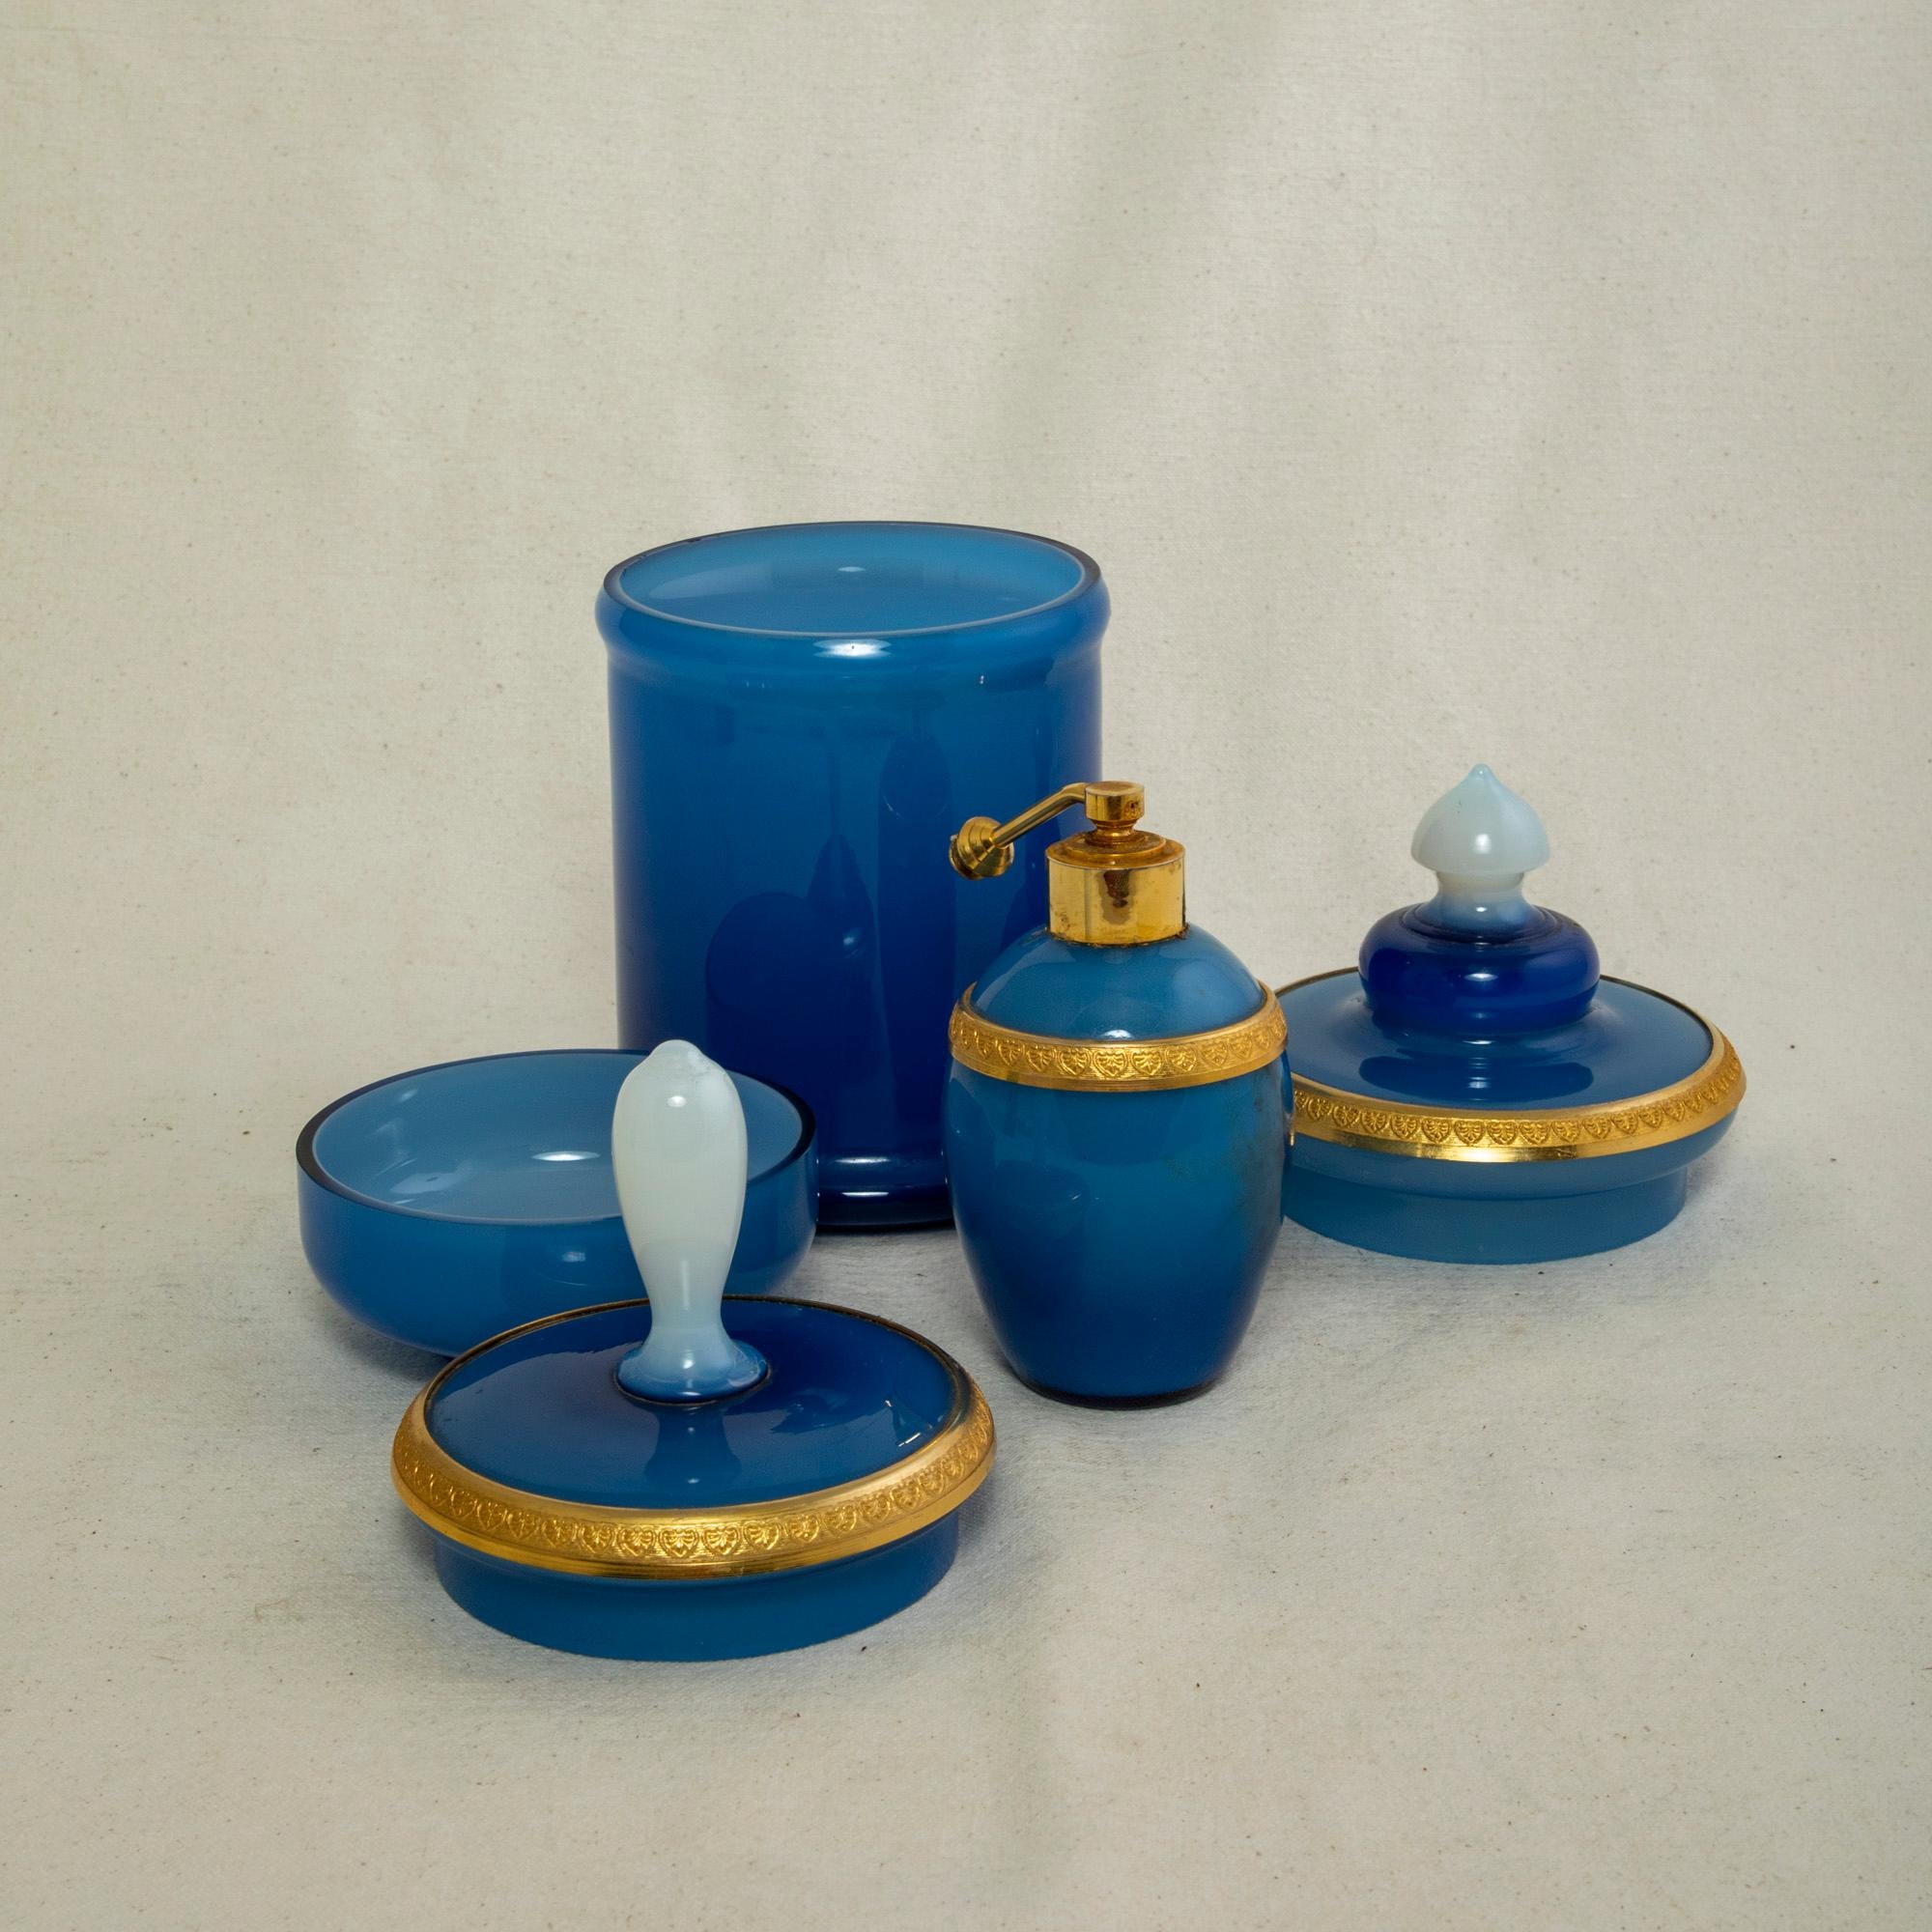 This set of three late nineteenth century French blue opaline vanity bottles features gilt bronze rims detailed with a palmette motif. Found in Chartres, France, this stunning trio includes two jars with lids for powder and cotton balls and a